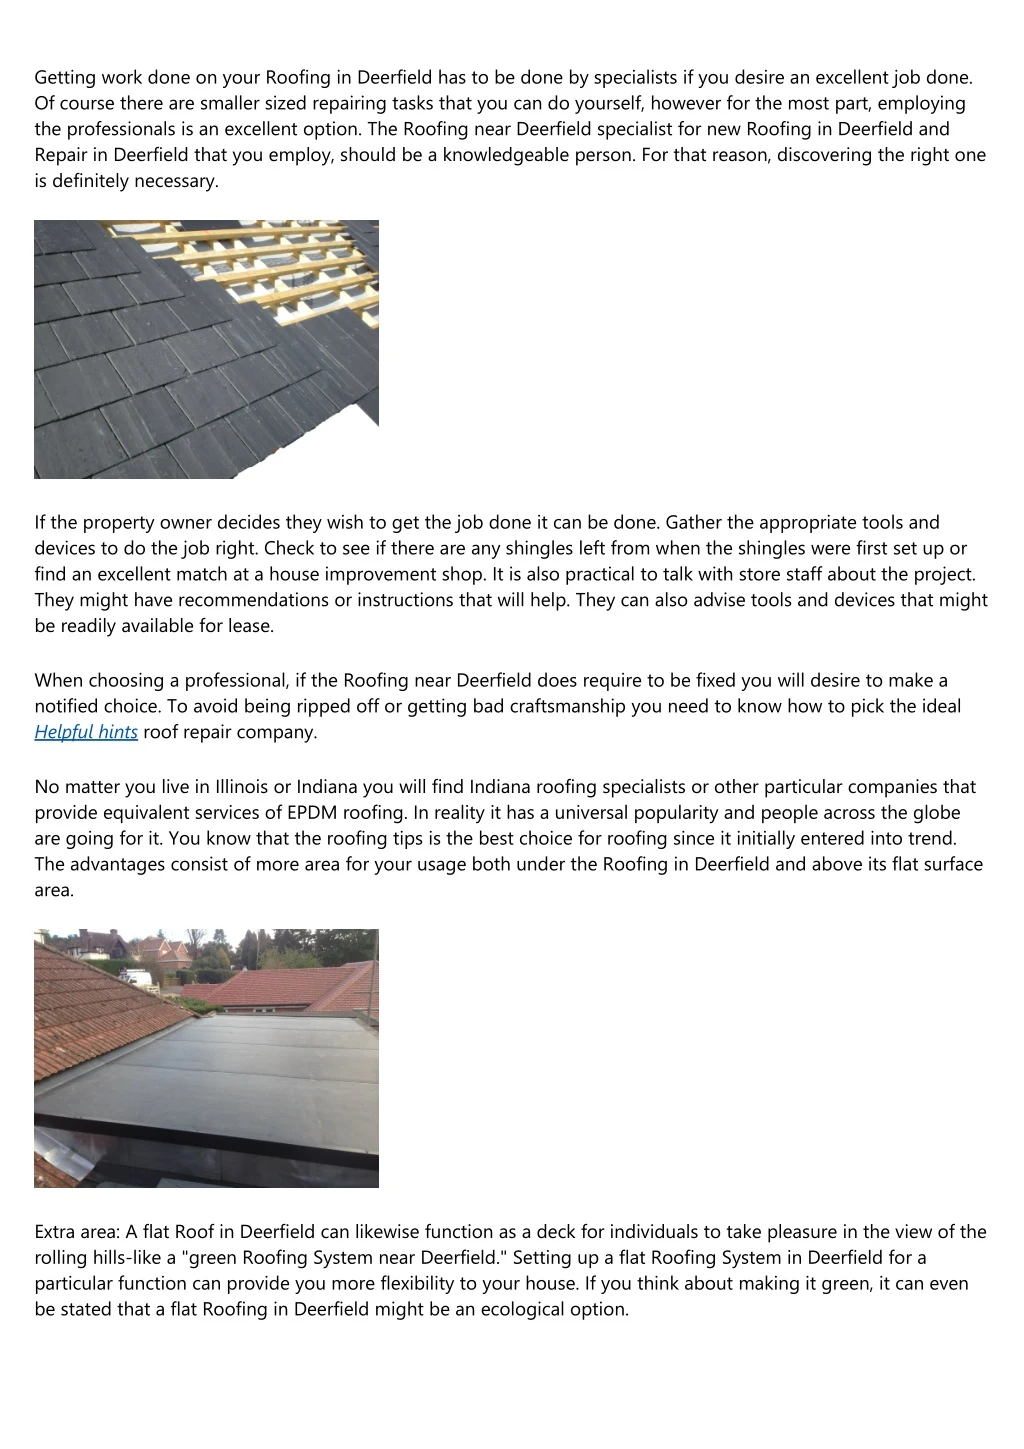 getting work done on your roofing in deerfield